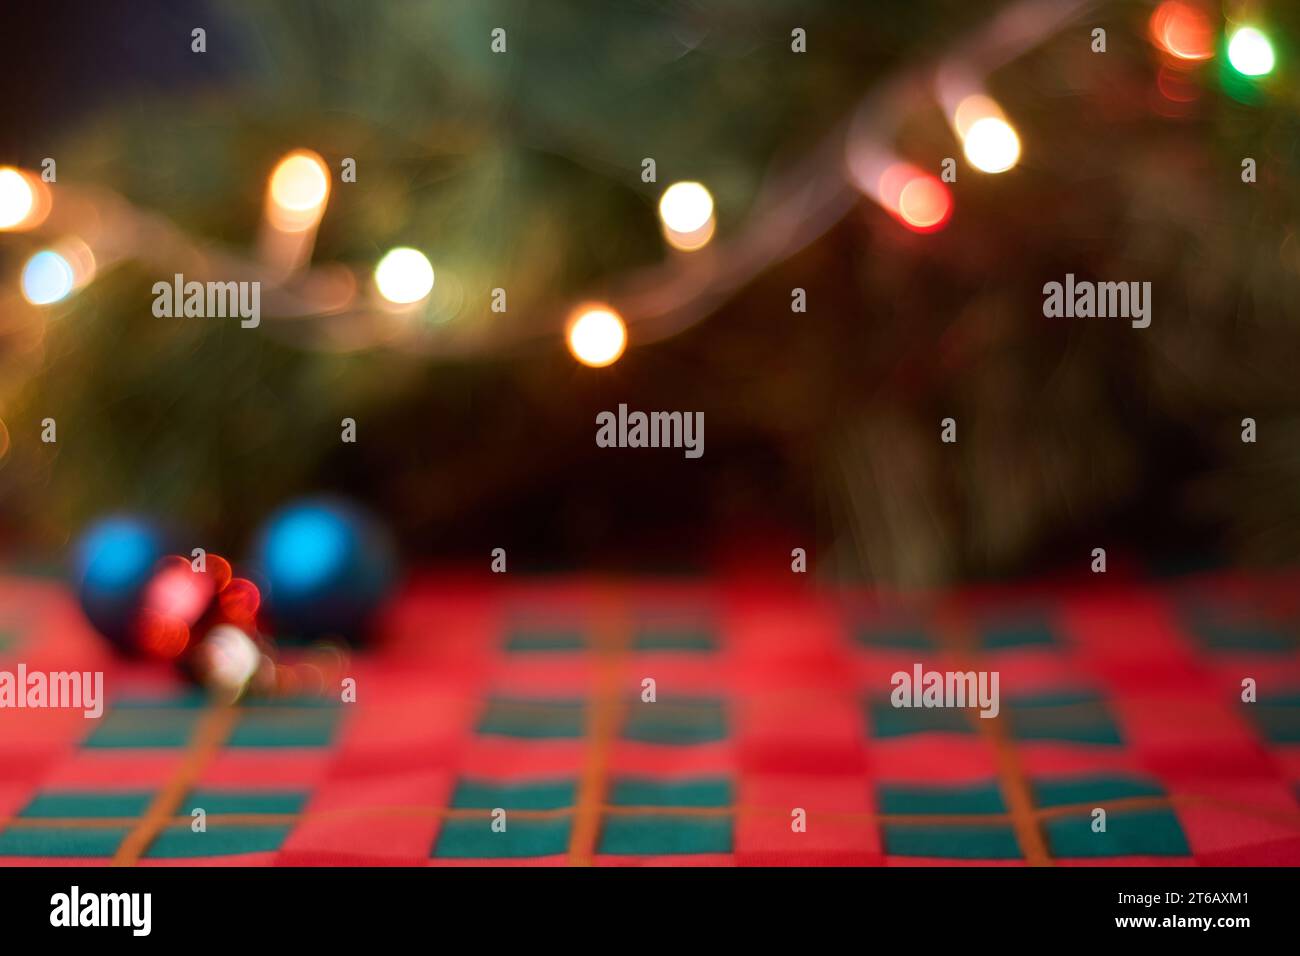 Horizontal Christmas background of blurred Christmas decoration on table with green and red tablecloth, Christmas balls, tree and lights. Copy space f Stock Photo